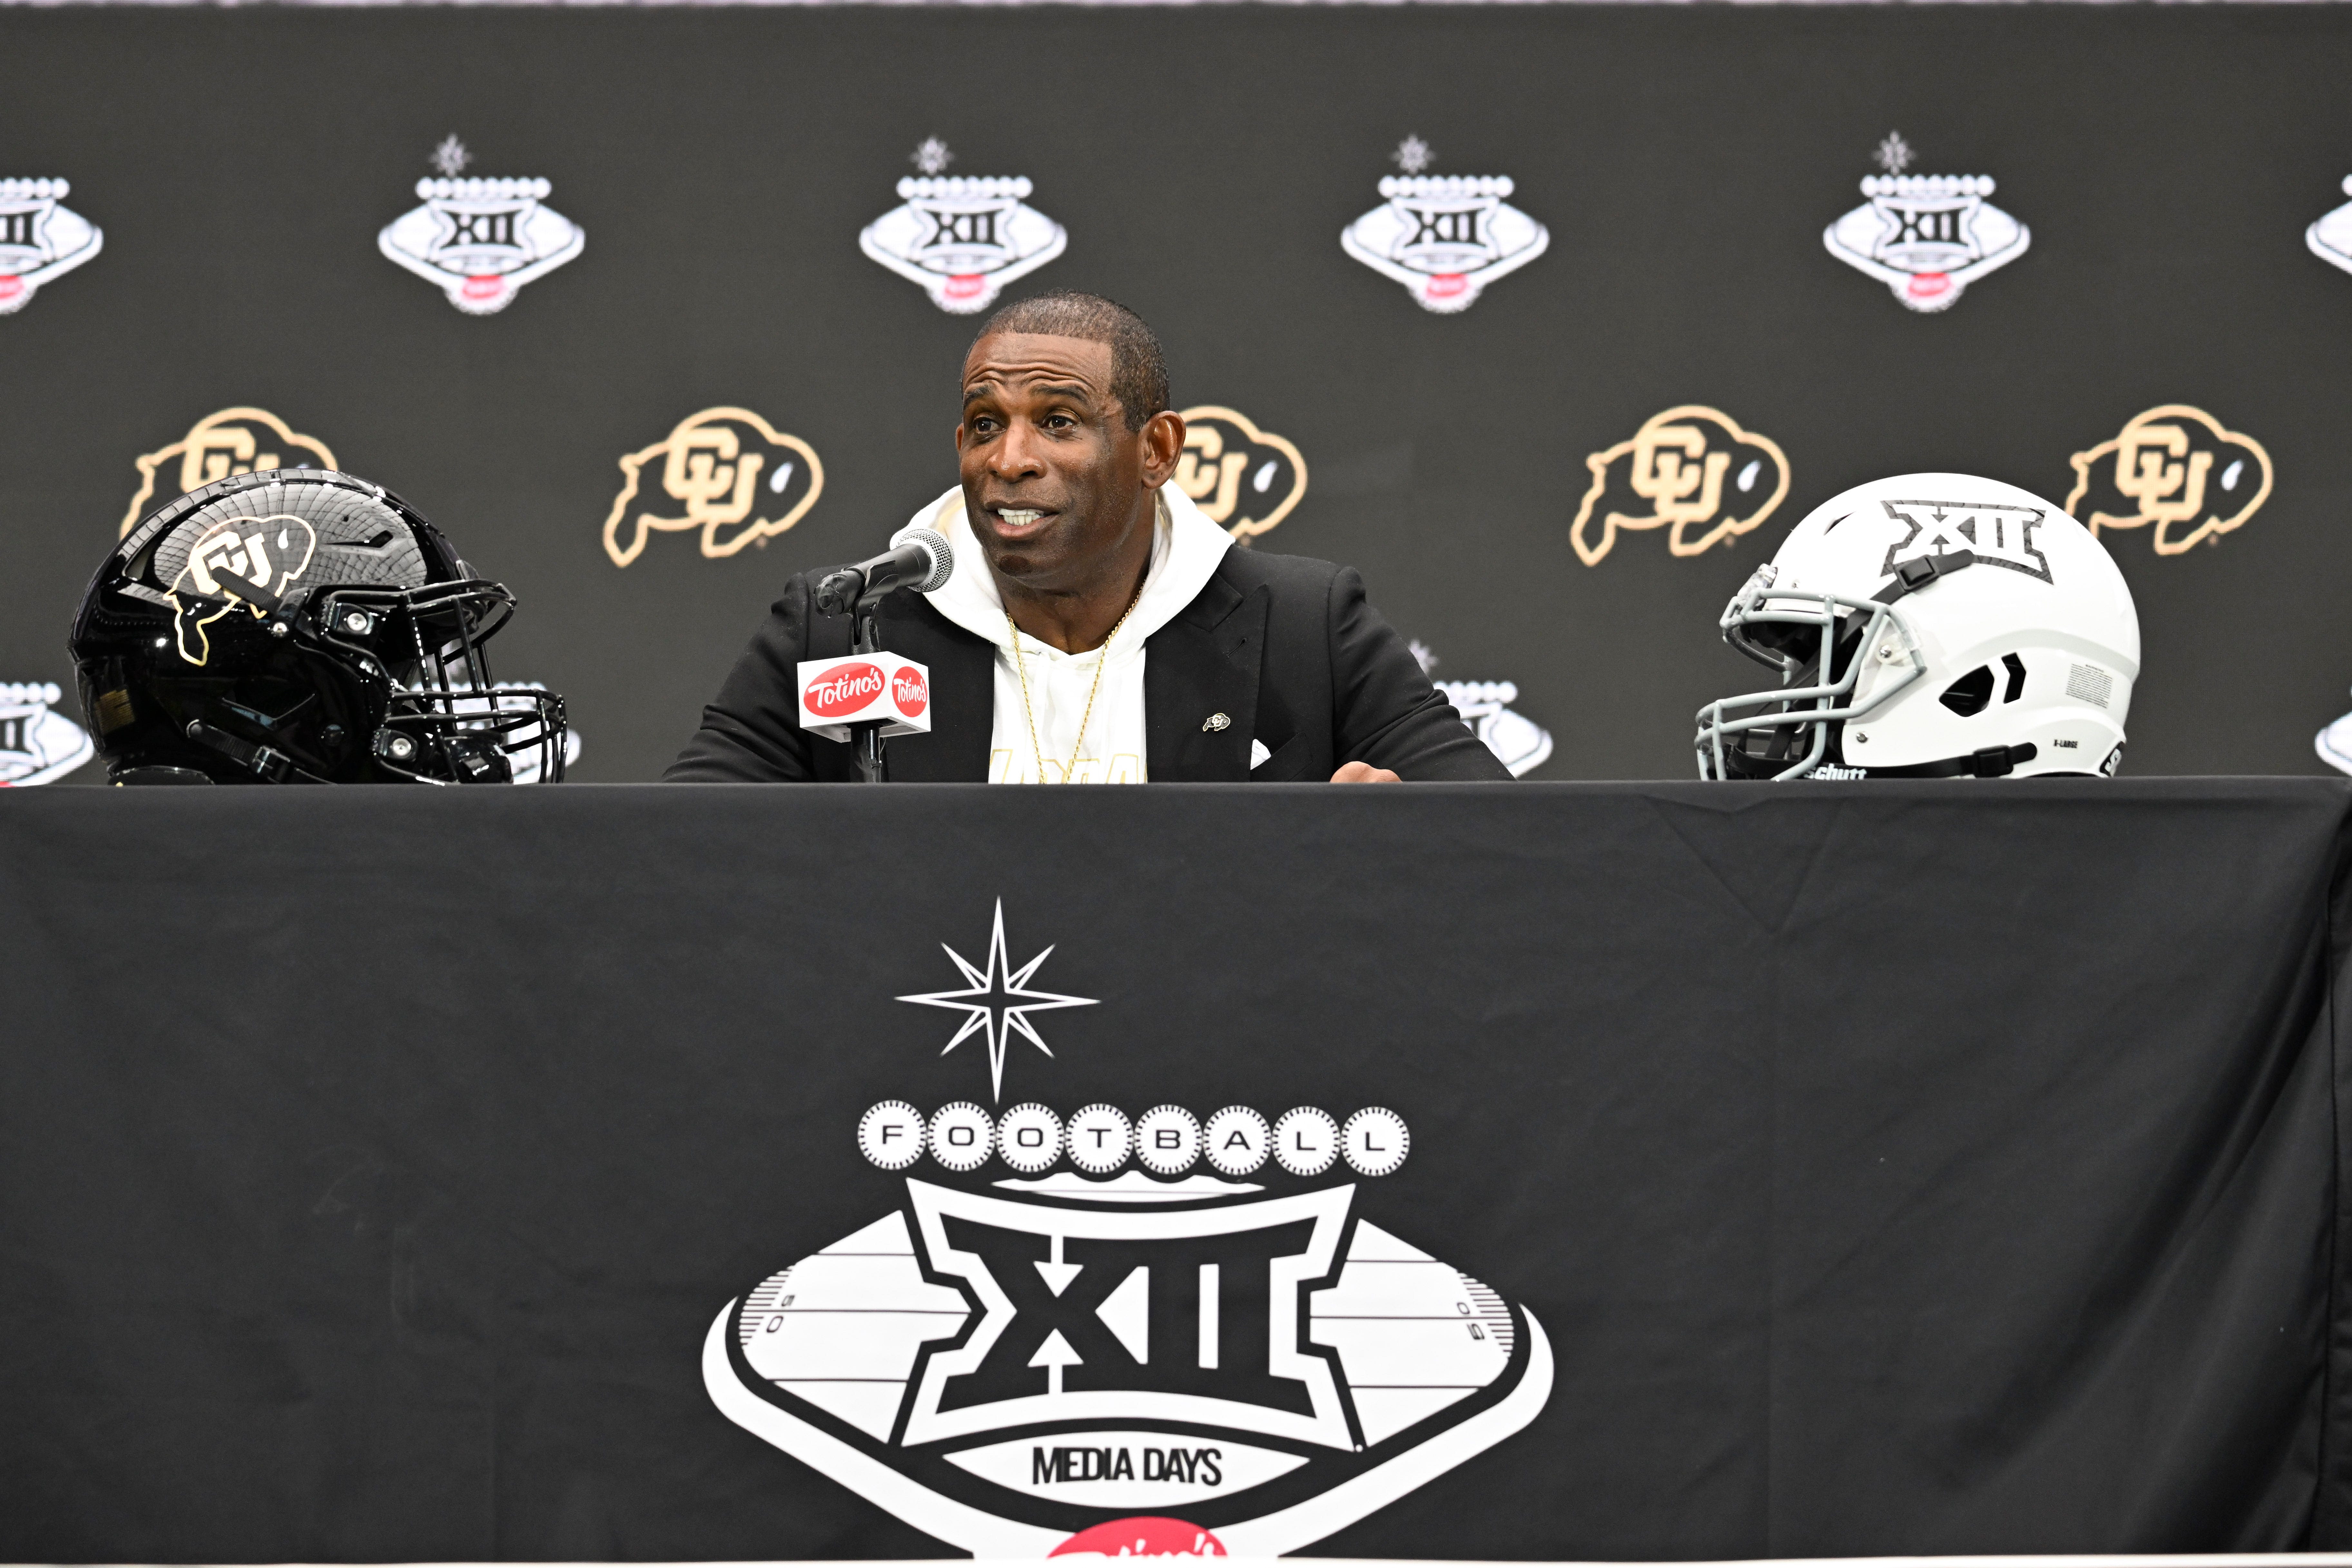 Social media reacts to Colorado's official return to the Big 12 Conference